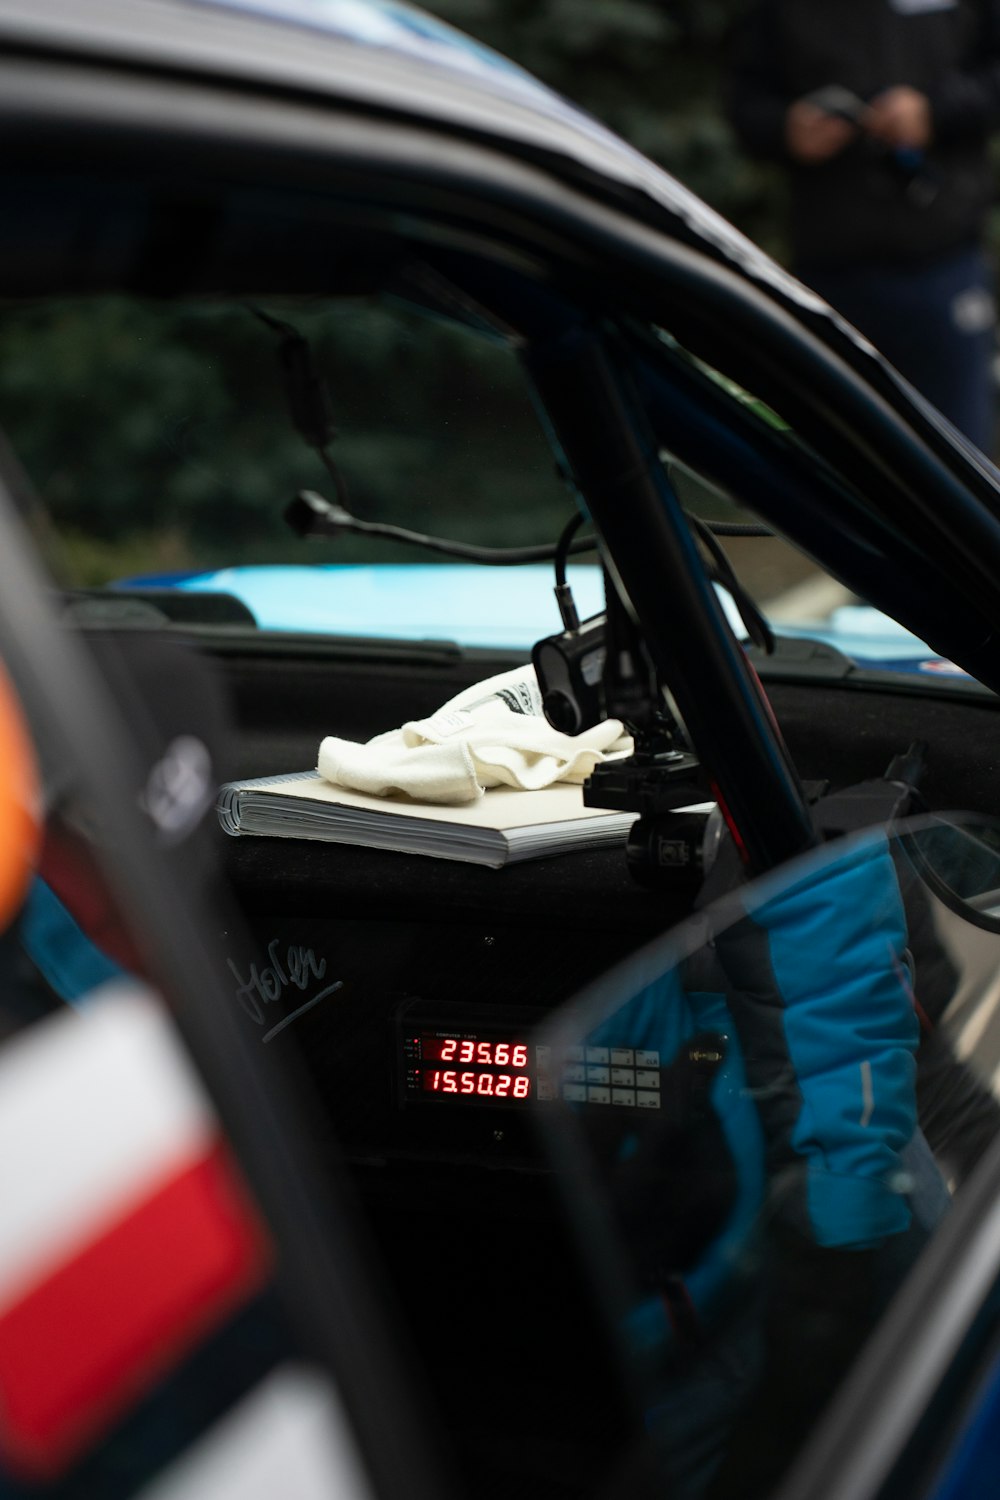 a pair of gloves sitting on top of a book in a car